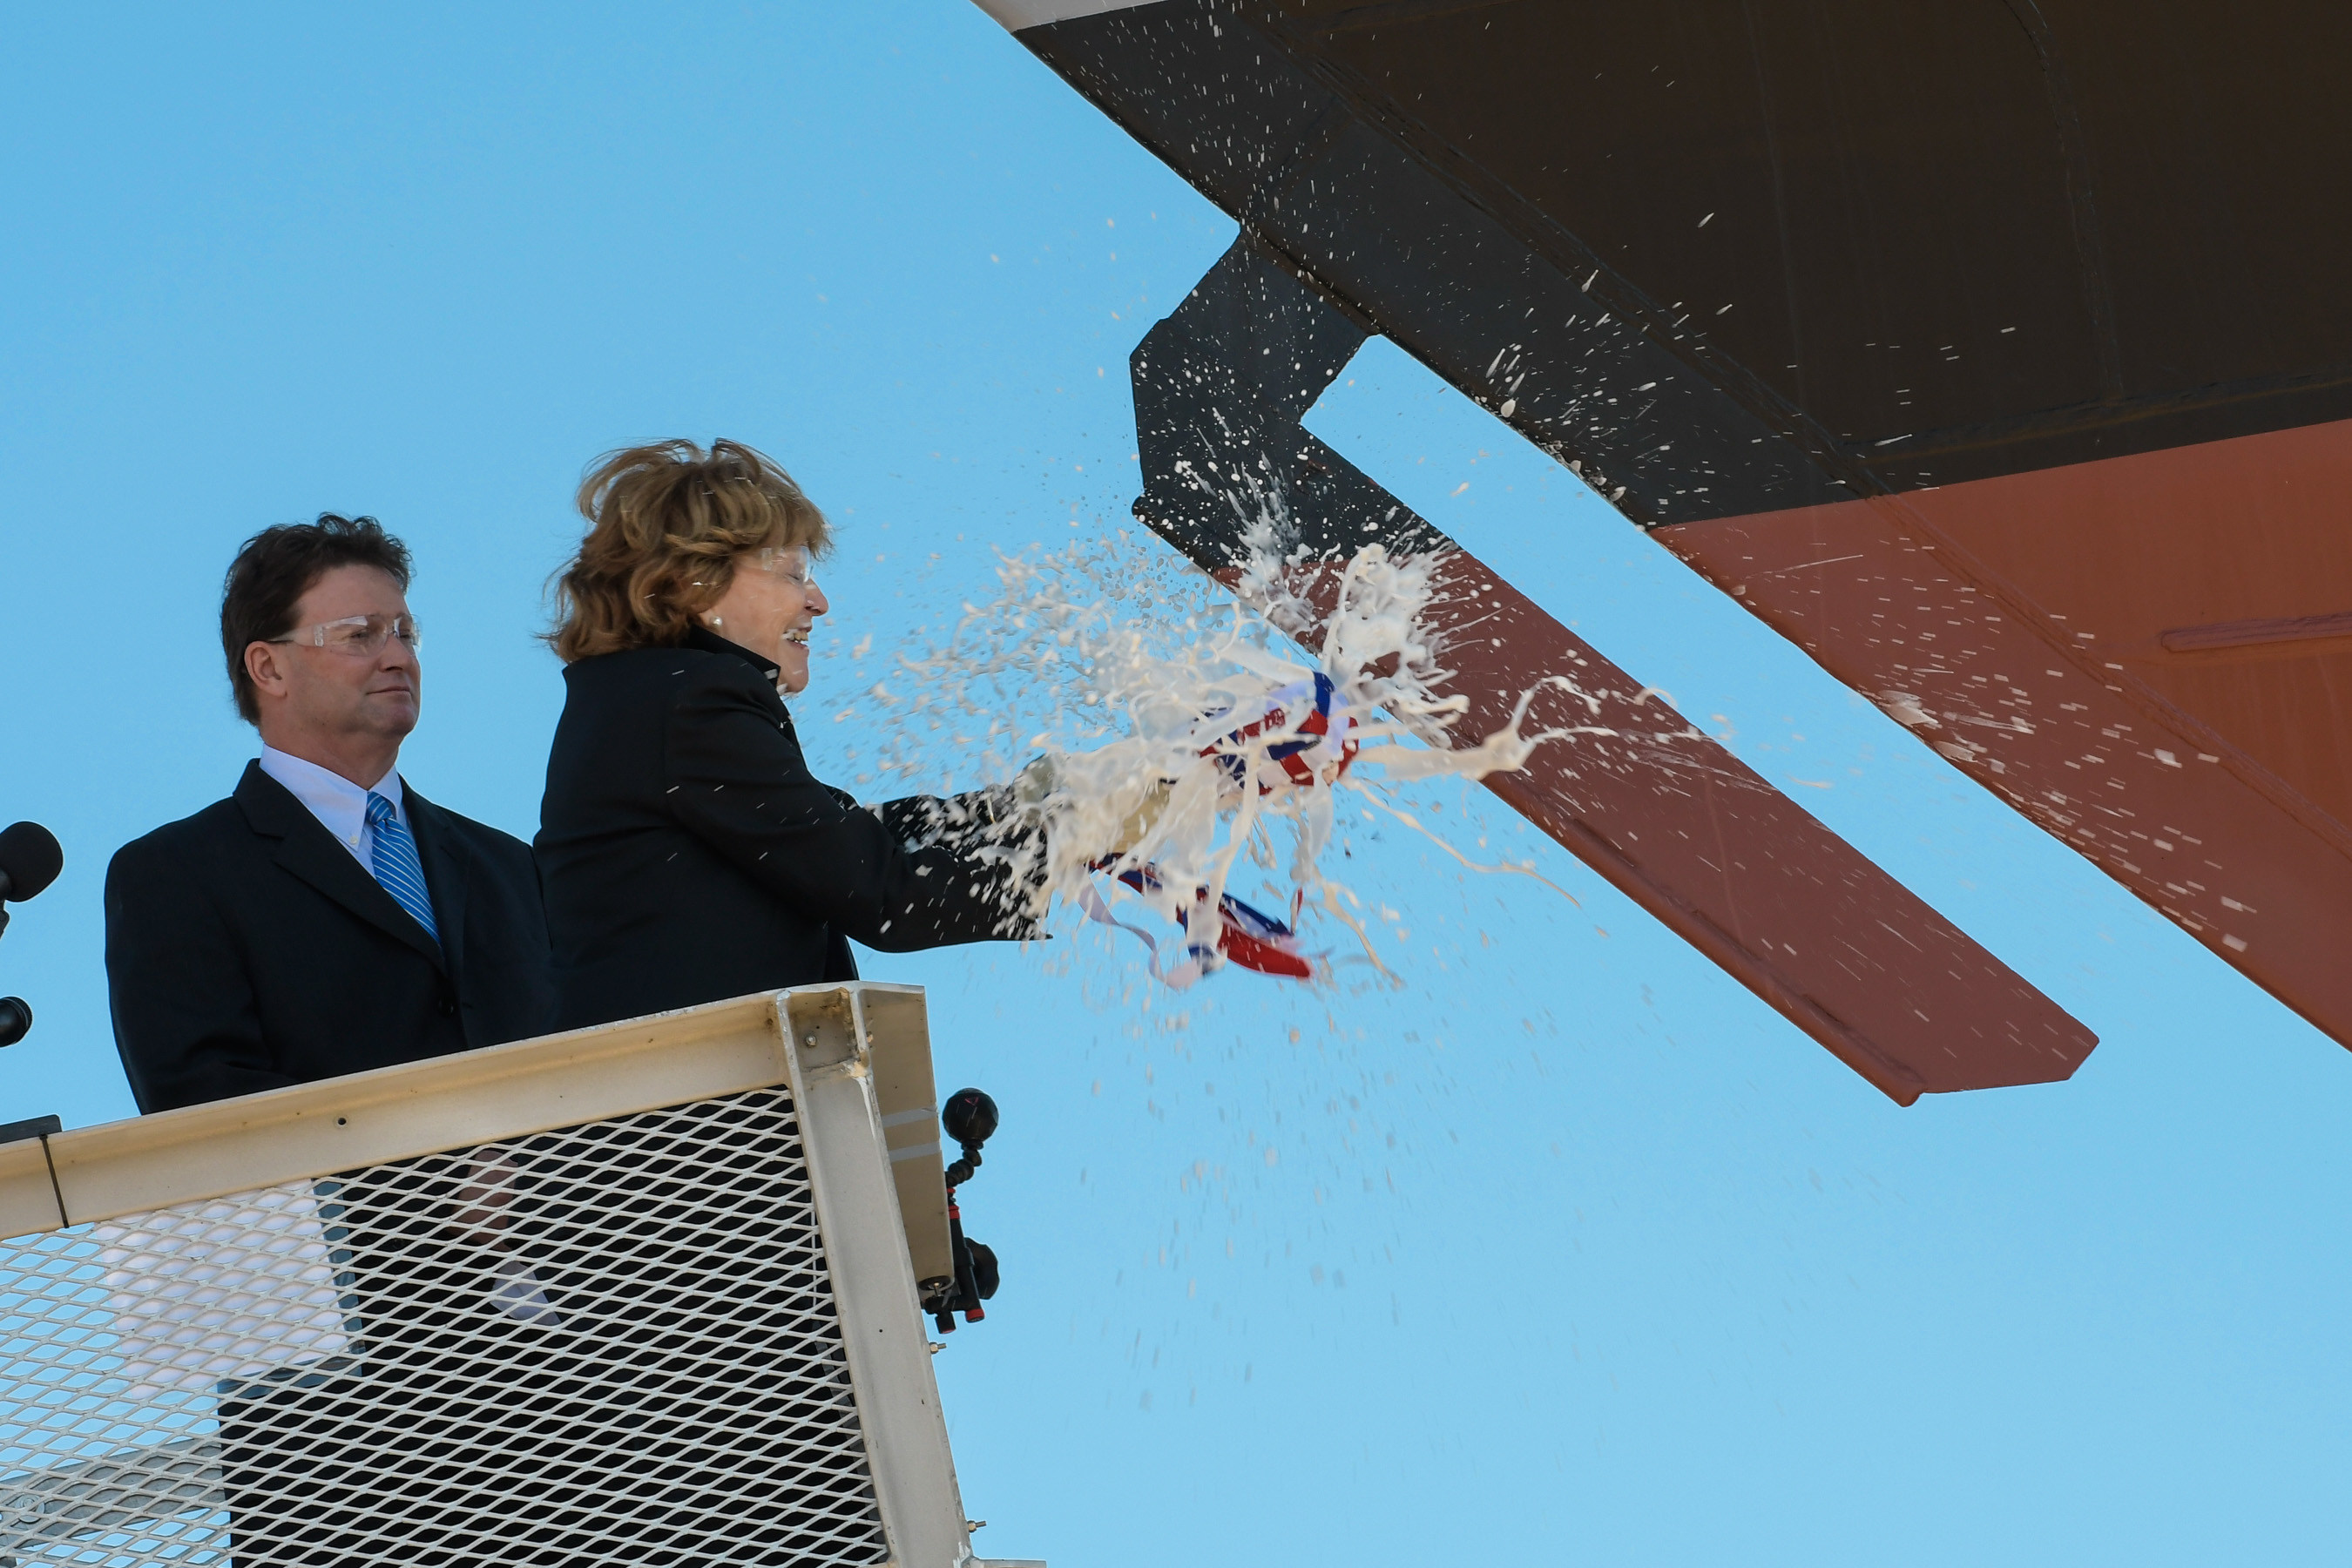 Ship sponsor Kate Lehrer breaks a bottle of champagne across the bow during the christening ceremony for the nation's 13th Littoral Combat Ship, the future USS Wichita, at the Fincantieri Marinette Marine shipyard on Sept. 17.